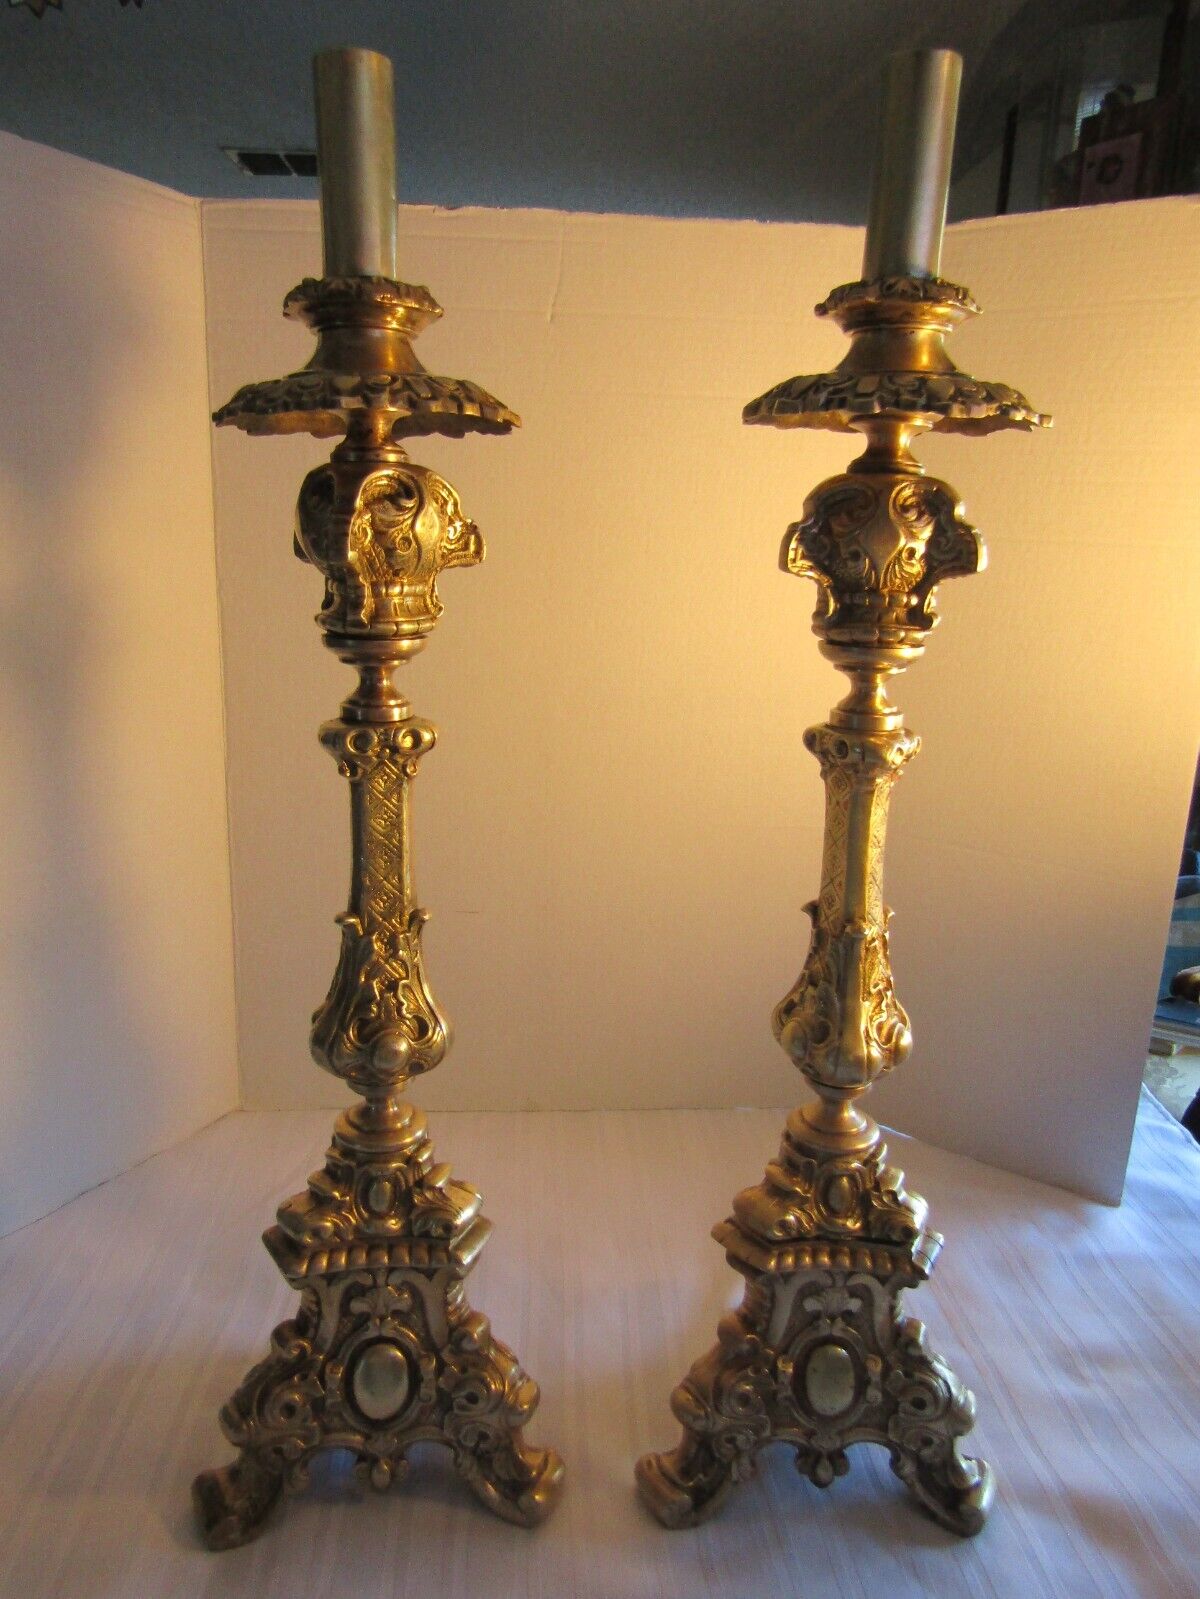 ANTIQUE FRENCH PAIRLARGE BAROQUE ALTARCHURCH CANDLE STICKS26TALL LATE 1800